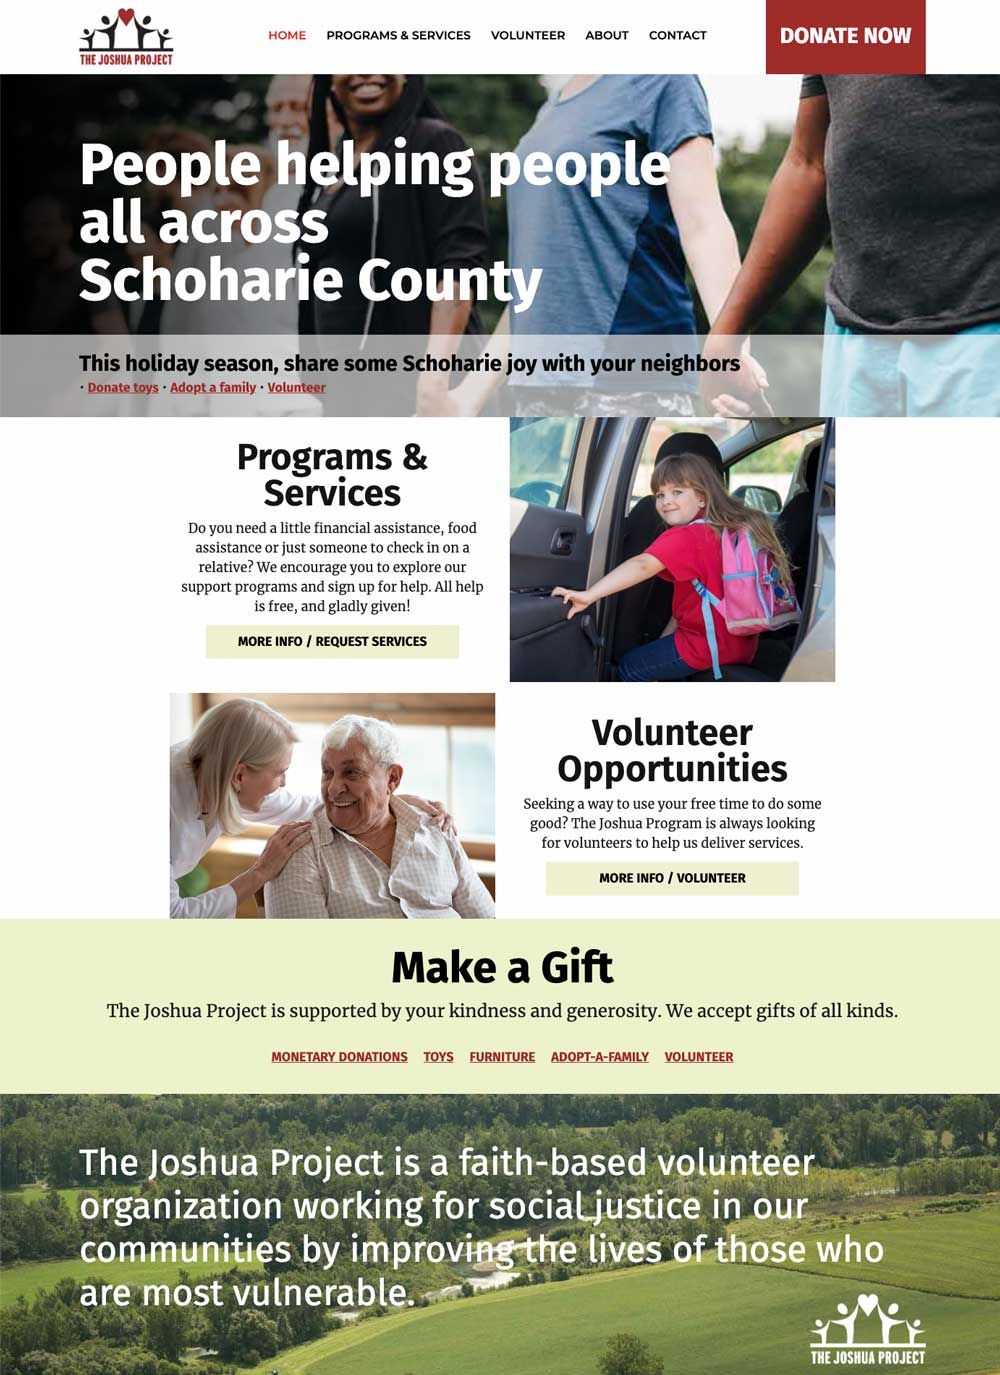 Joshua Project Home Page